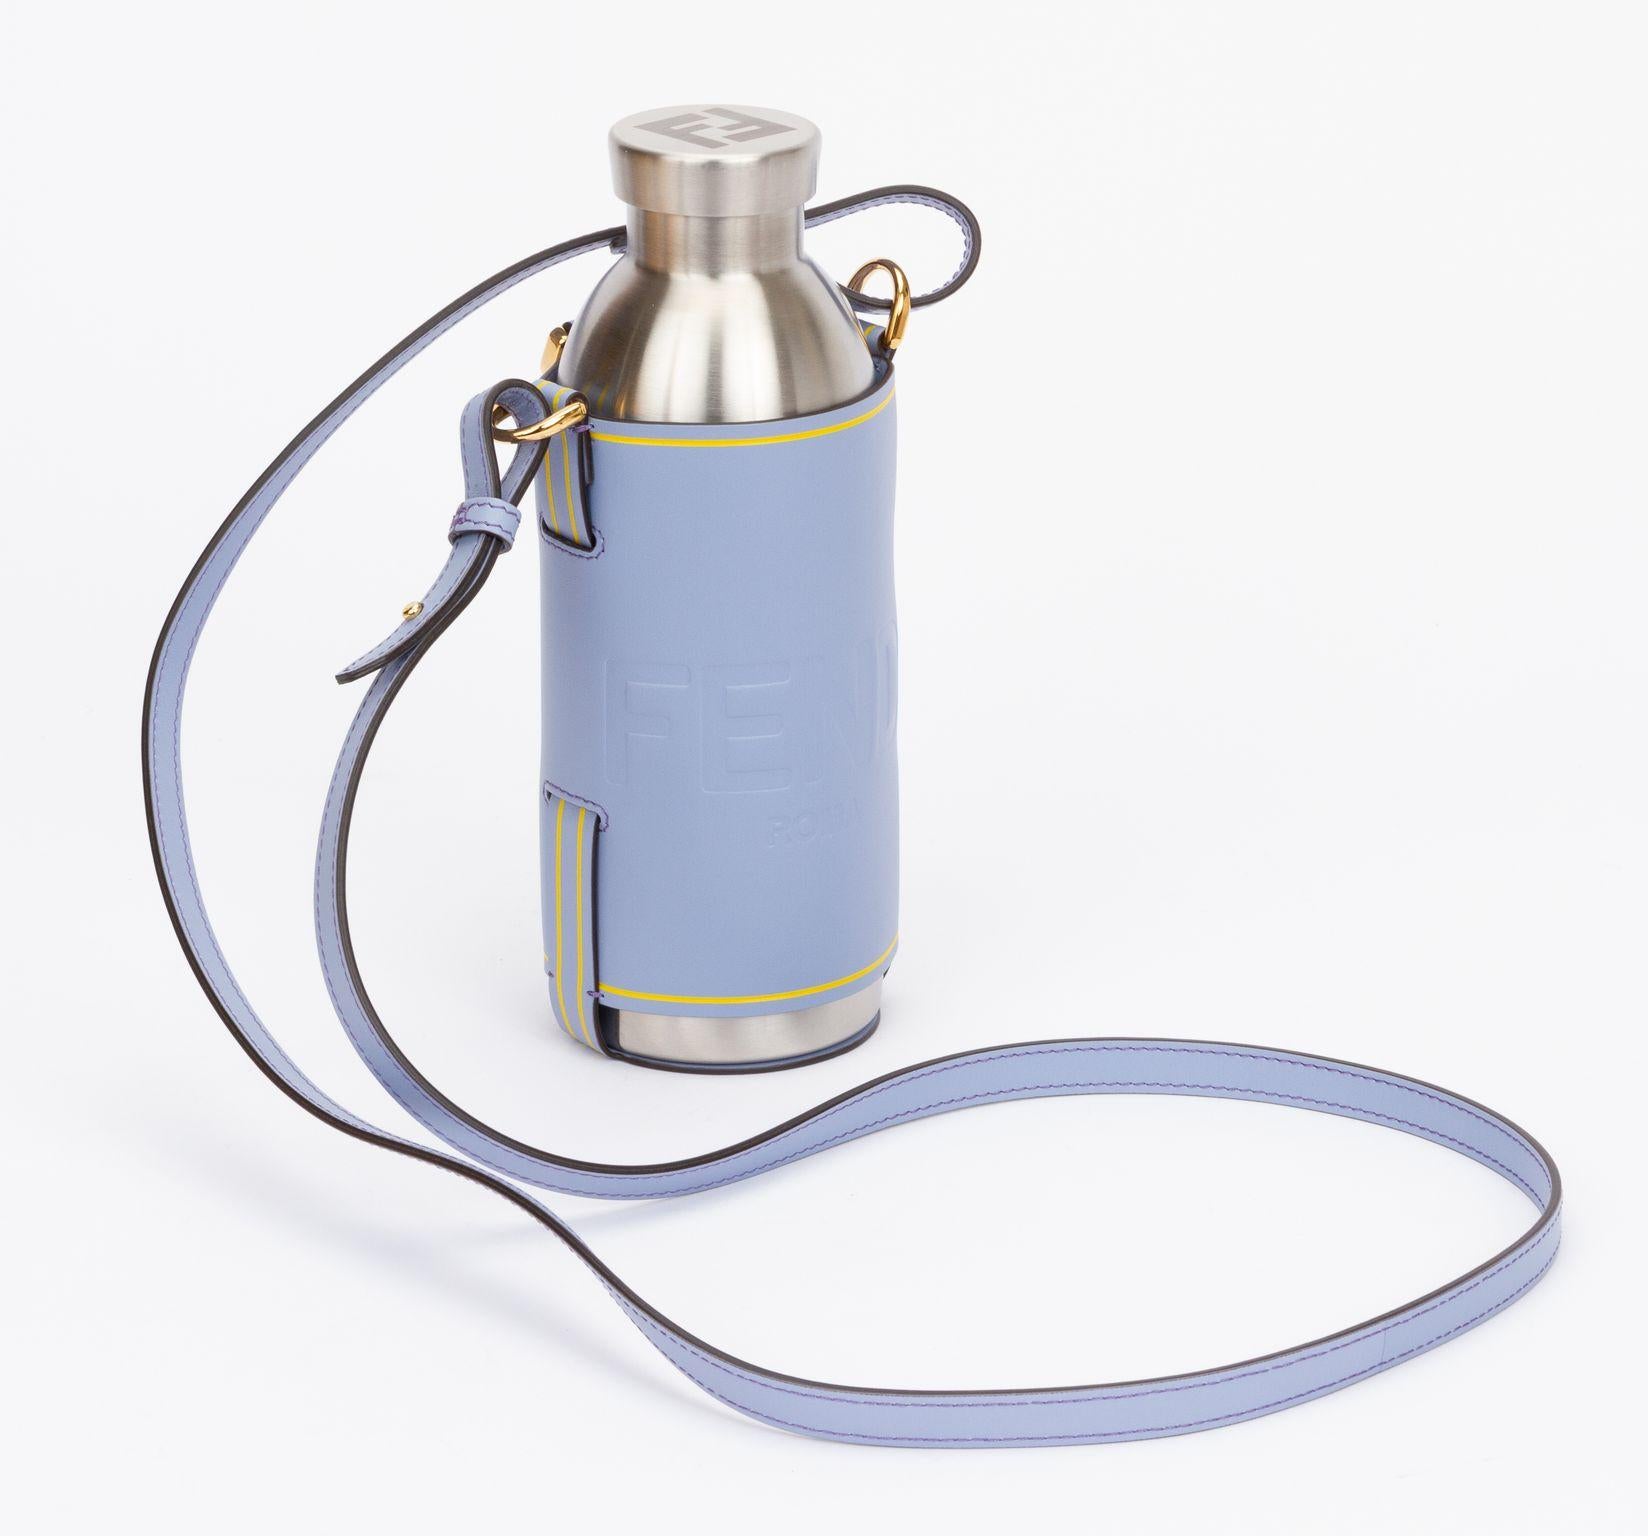 Fendi bottle holder made of calfskin leather in light blue. The piece comes with an adjustable and detachable shoulder strap (drop 21.5